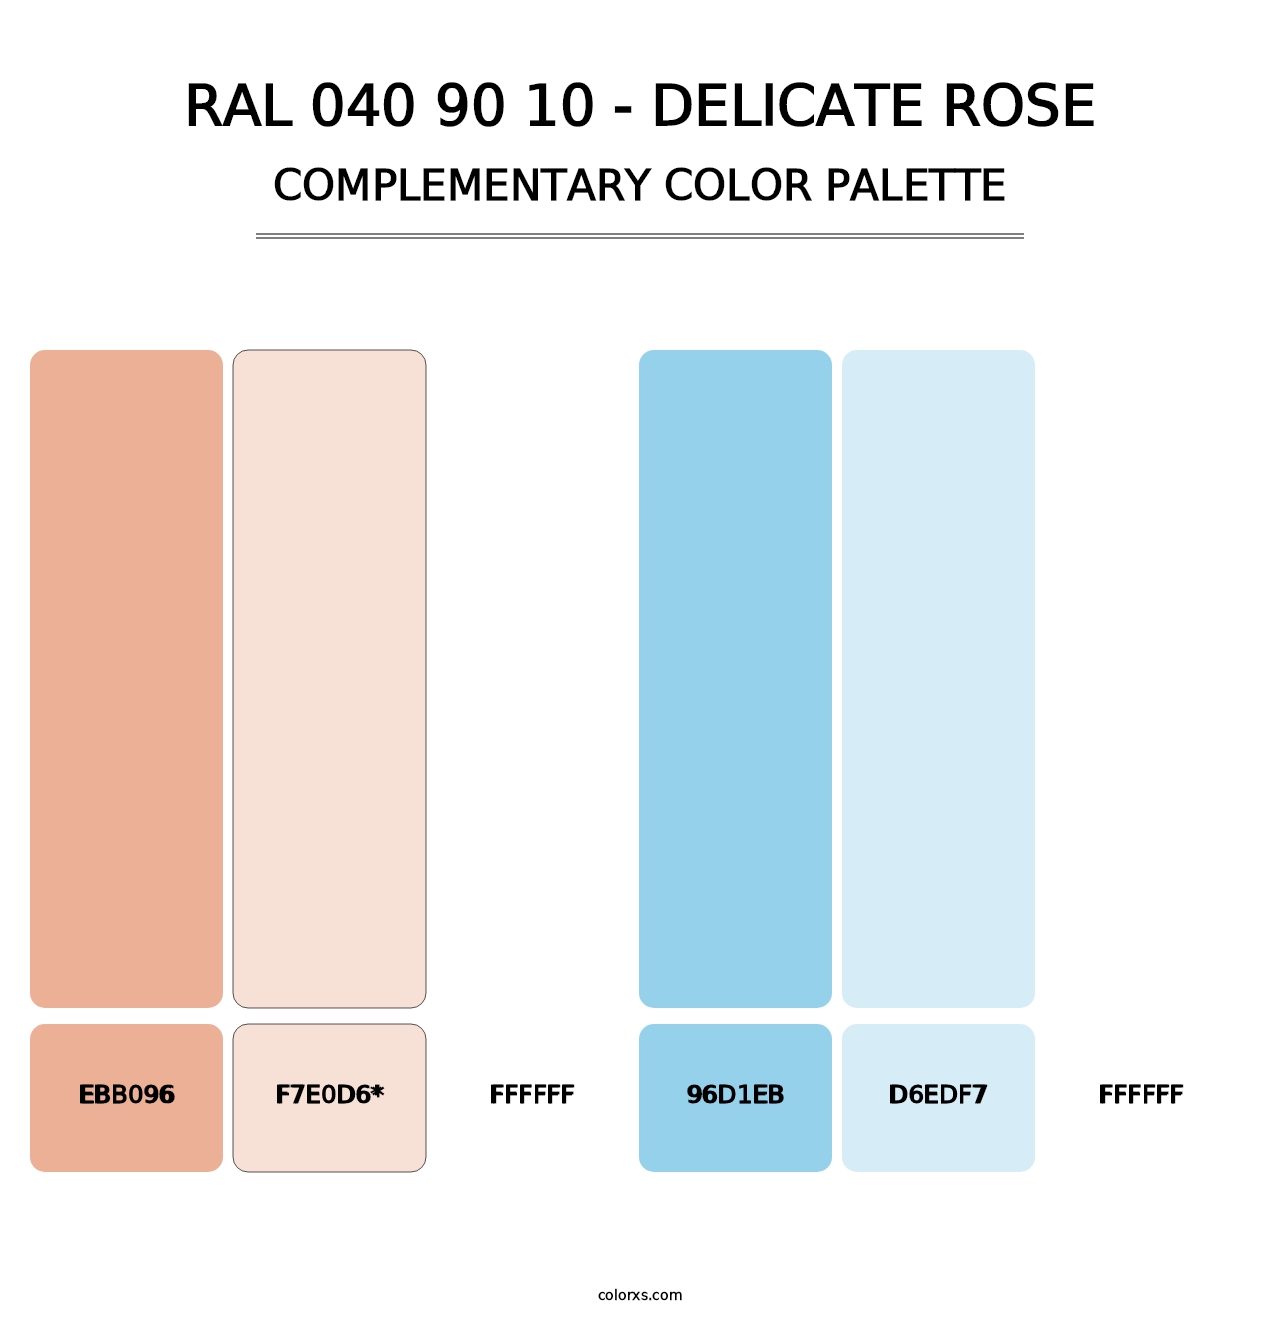 RAL 040 90 10 - Delicate Rose - Complementary Color Palette